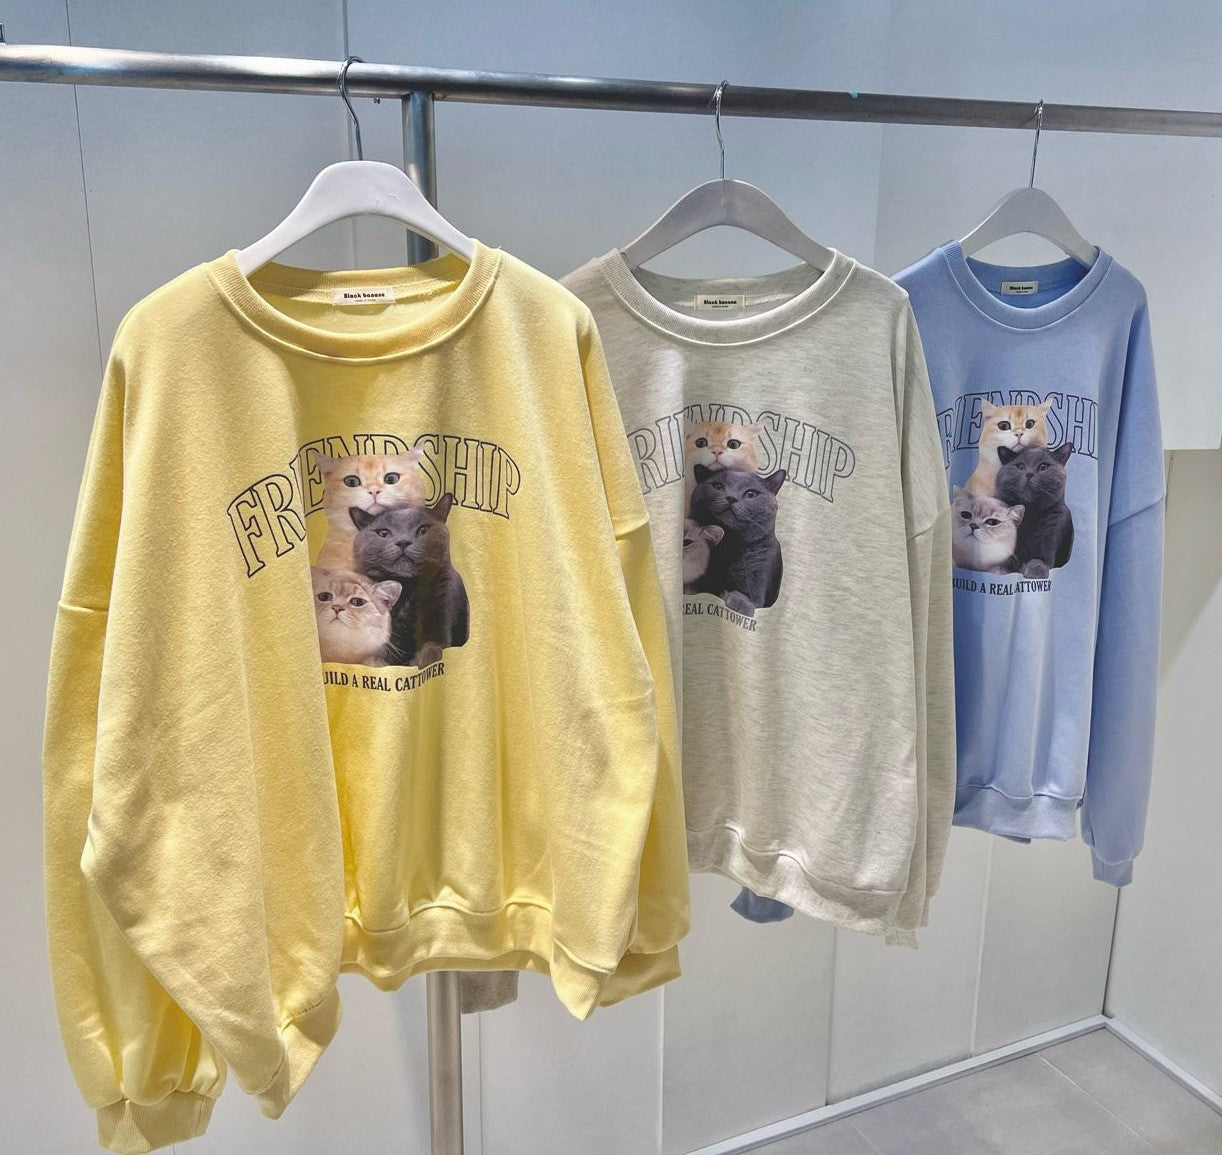 (NEW) Friendship with Cat Sweat shirts